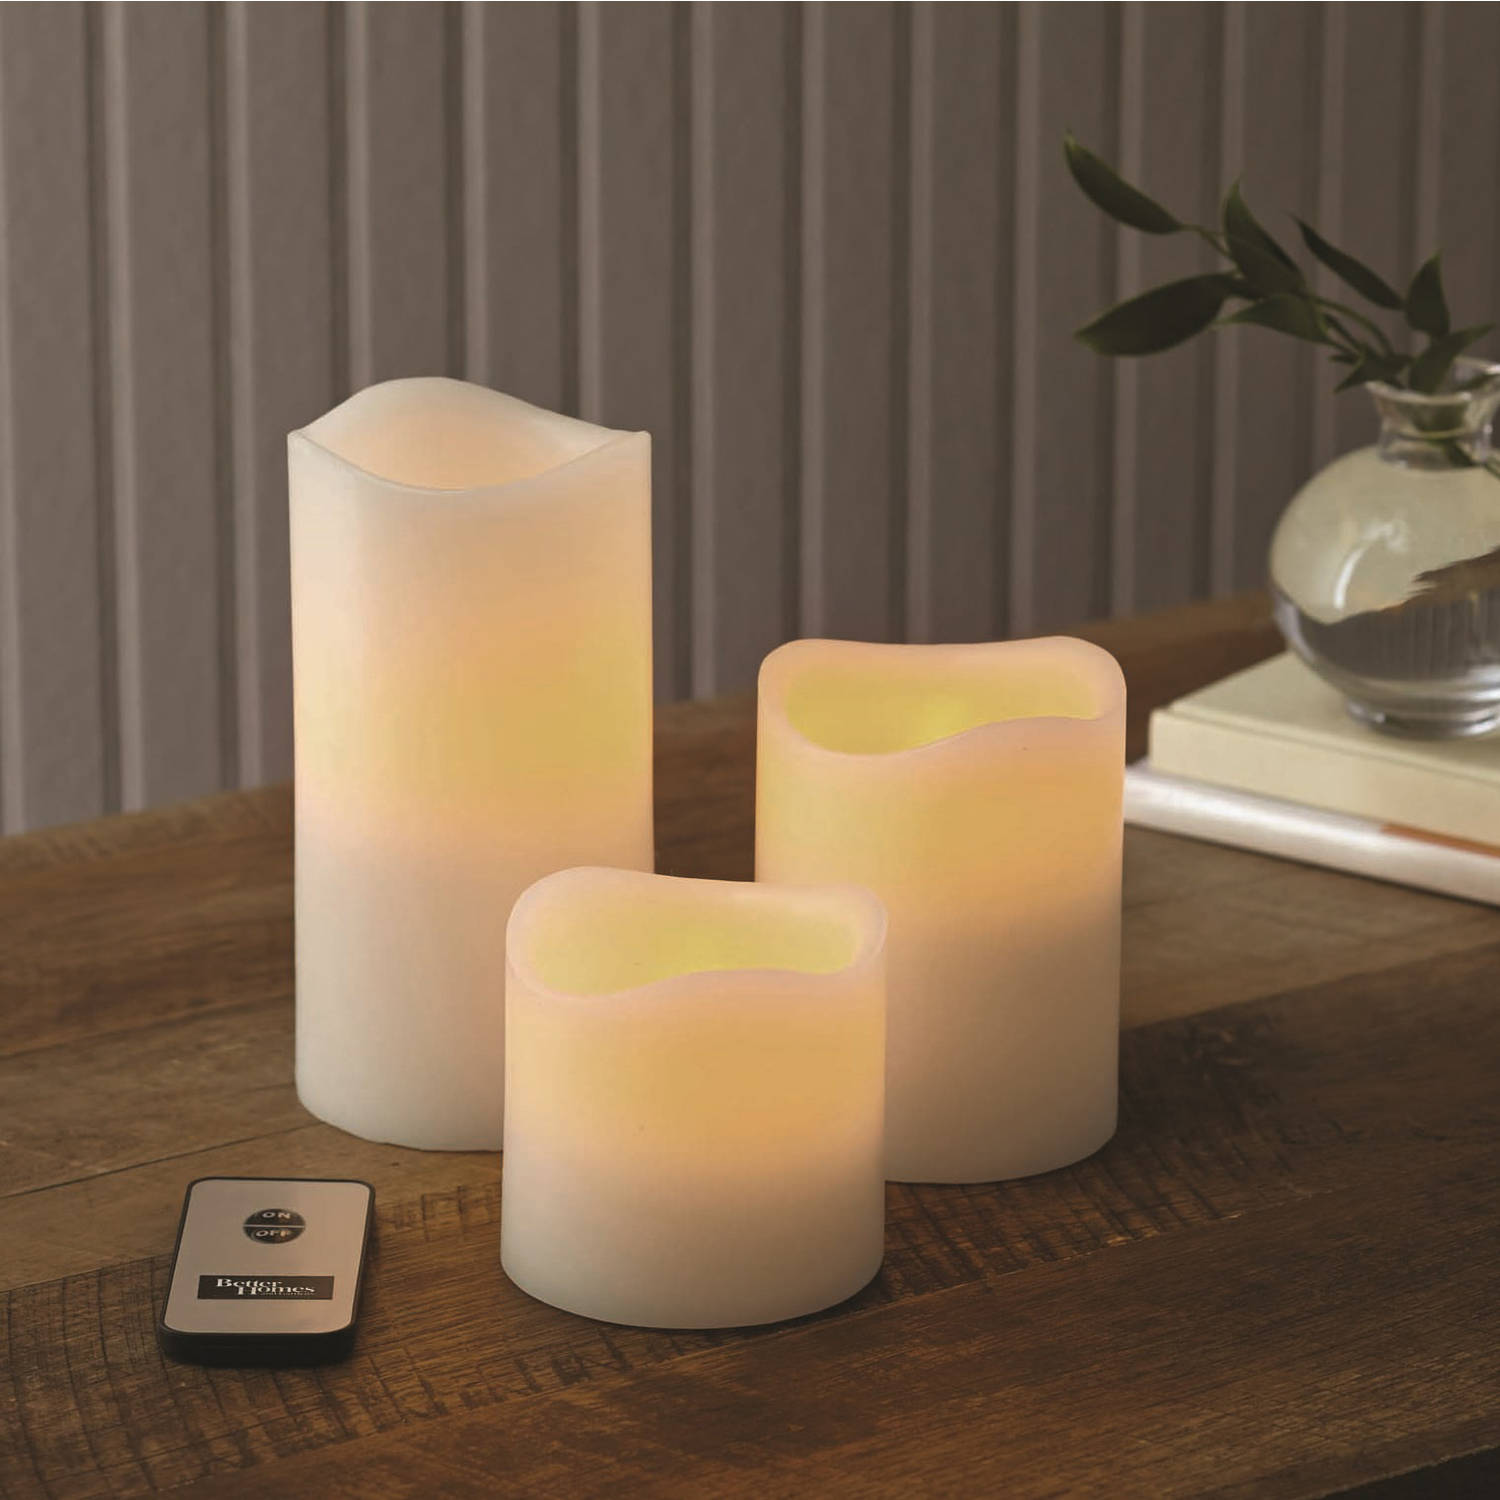 Better Homes & Gardens Flameless LED Pillar Candles 3-Pack Vanilla Scented - image 3 of 9